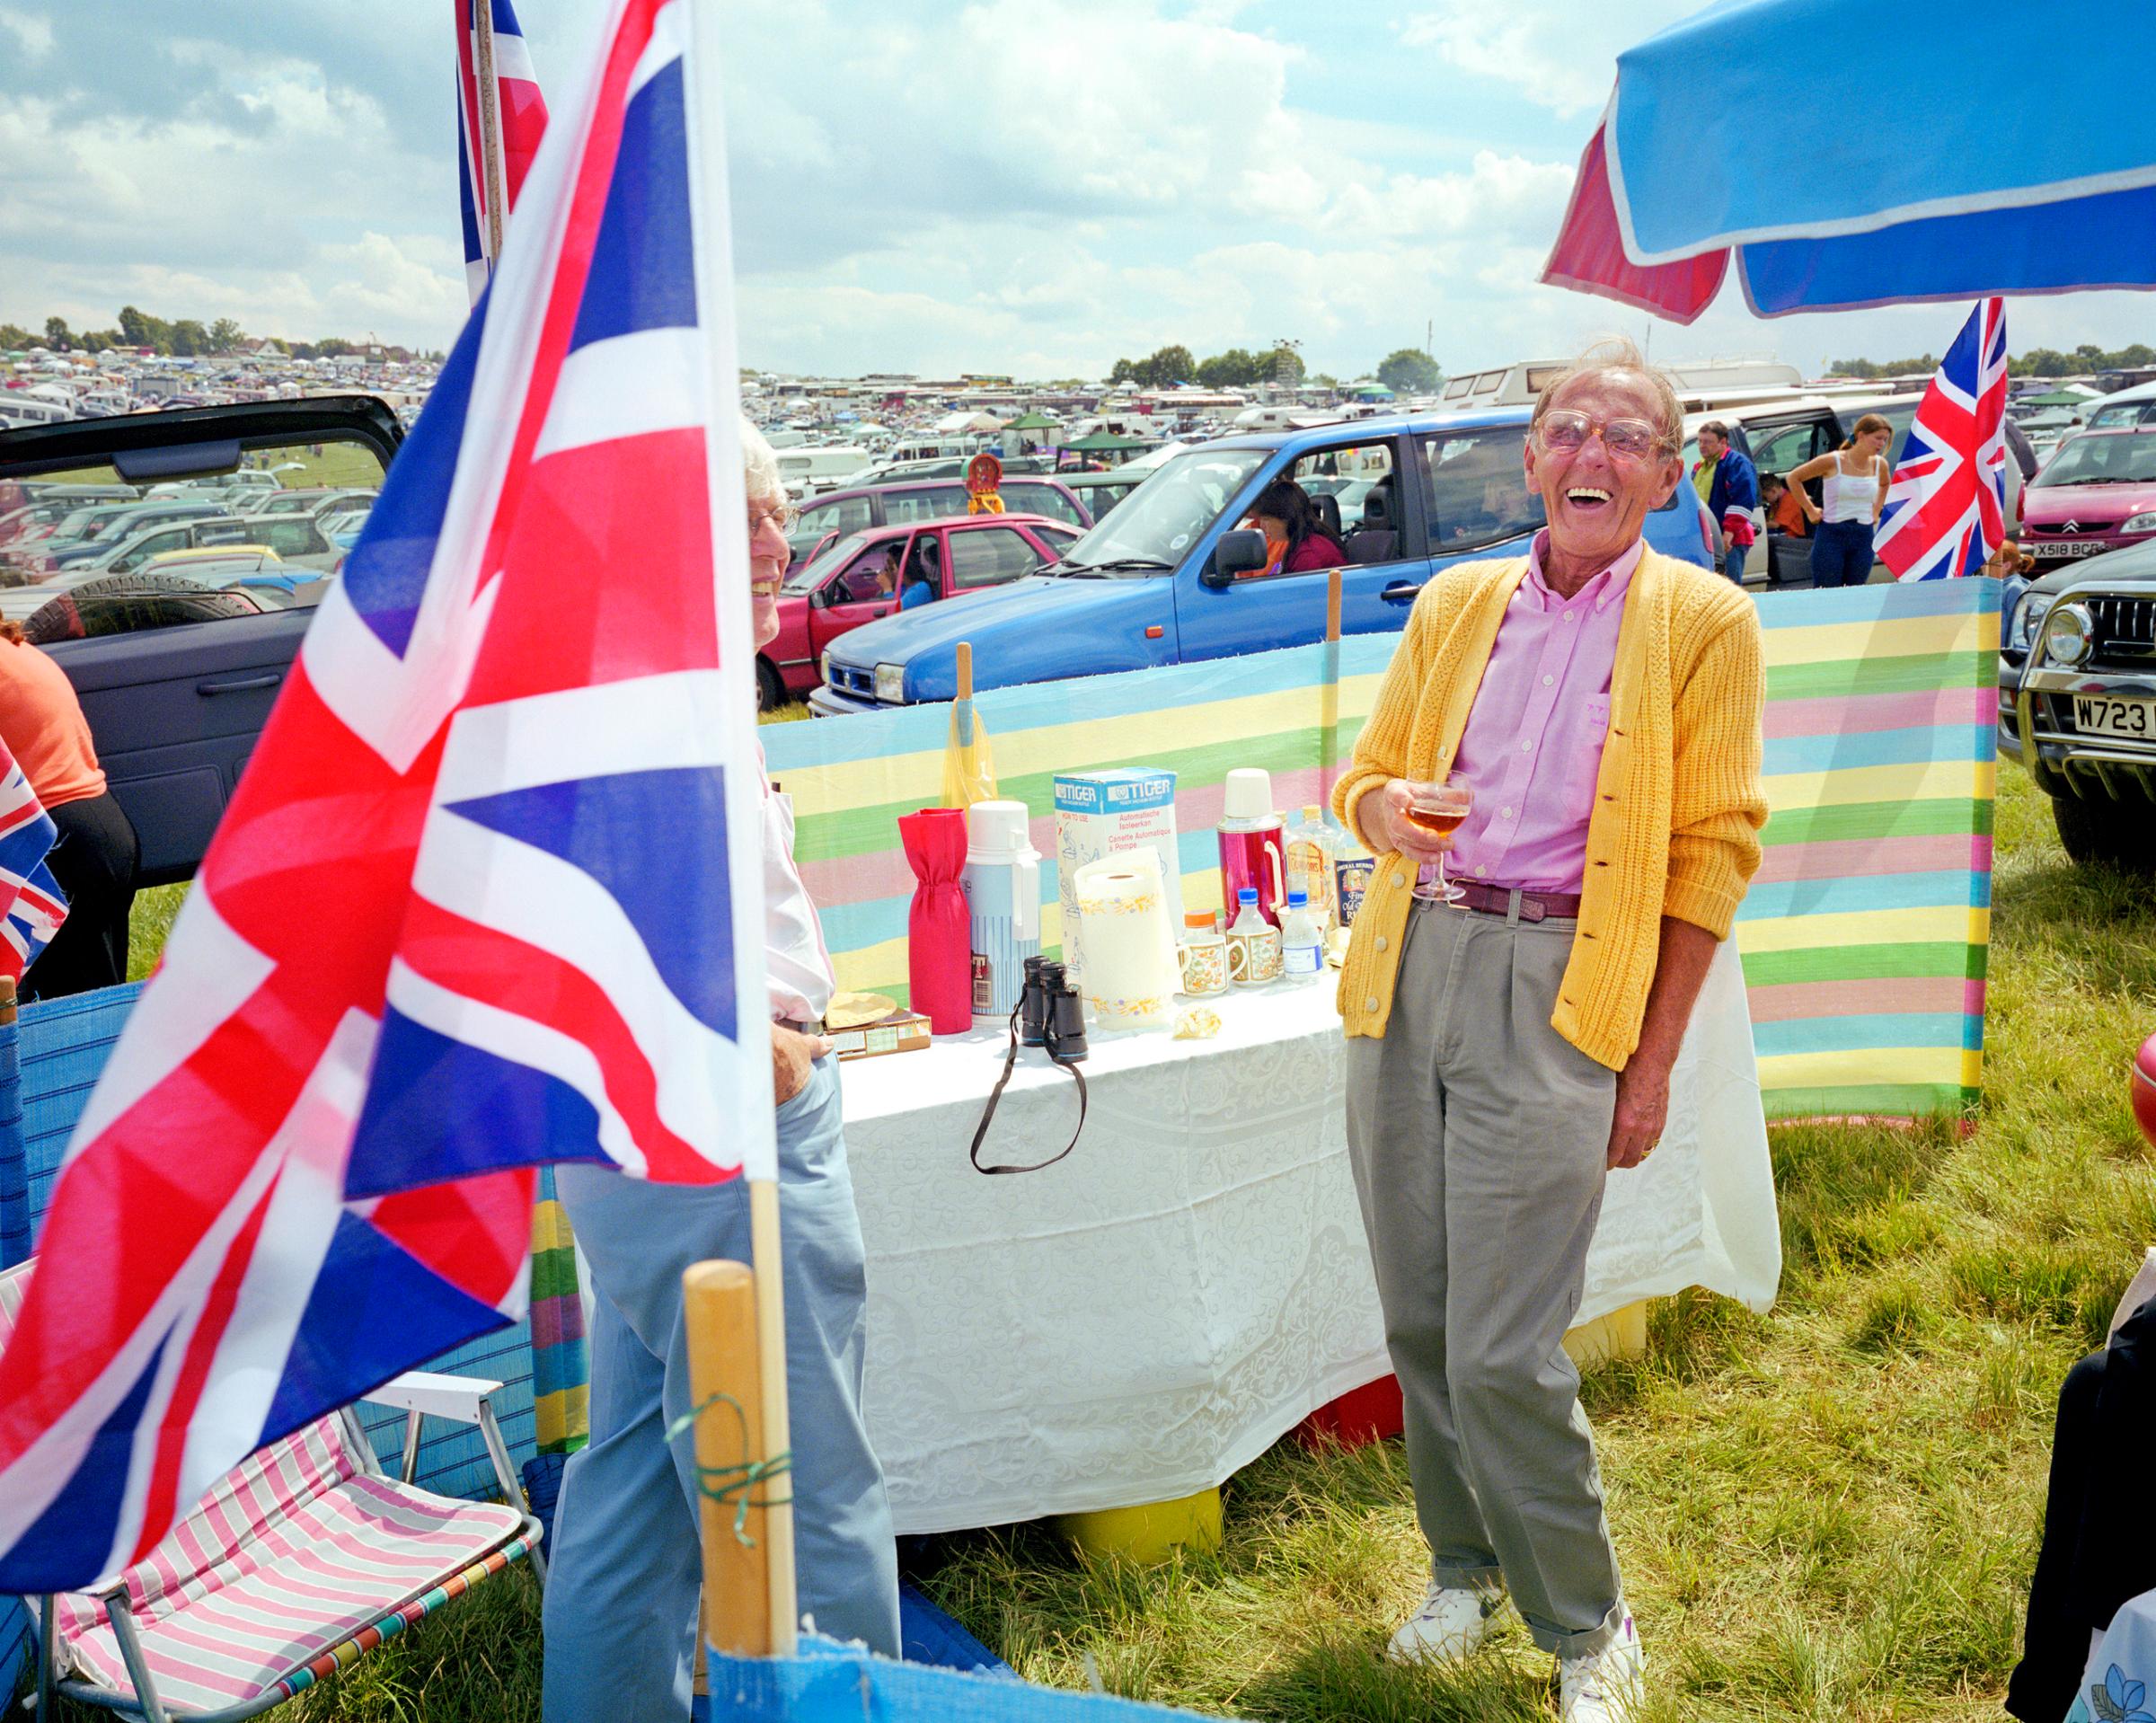 Picnic in the car park on Derby Day at Epsom Downs Racecourse, June 2001